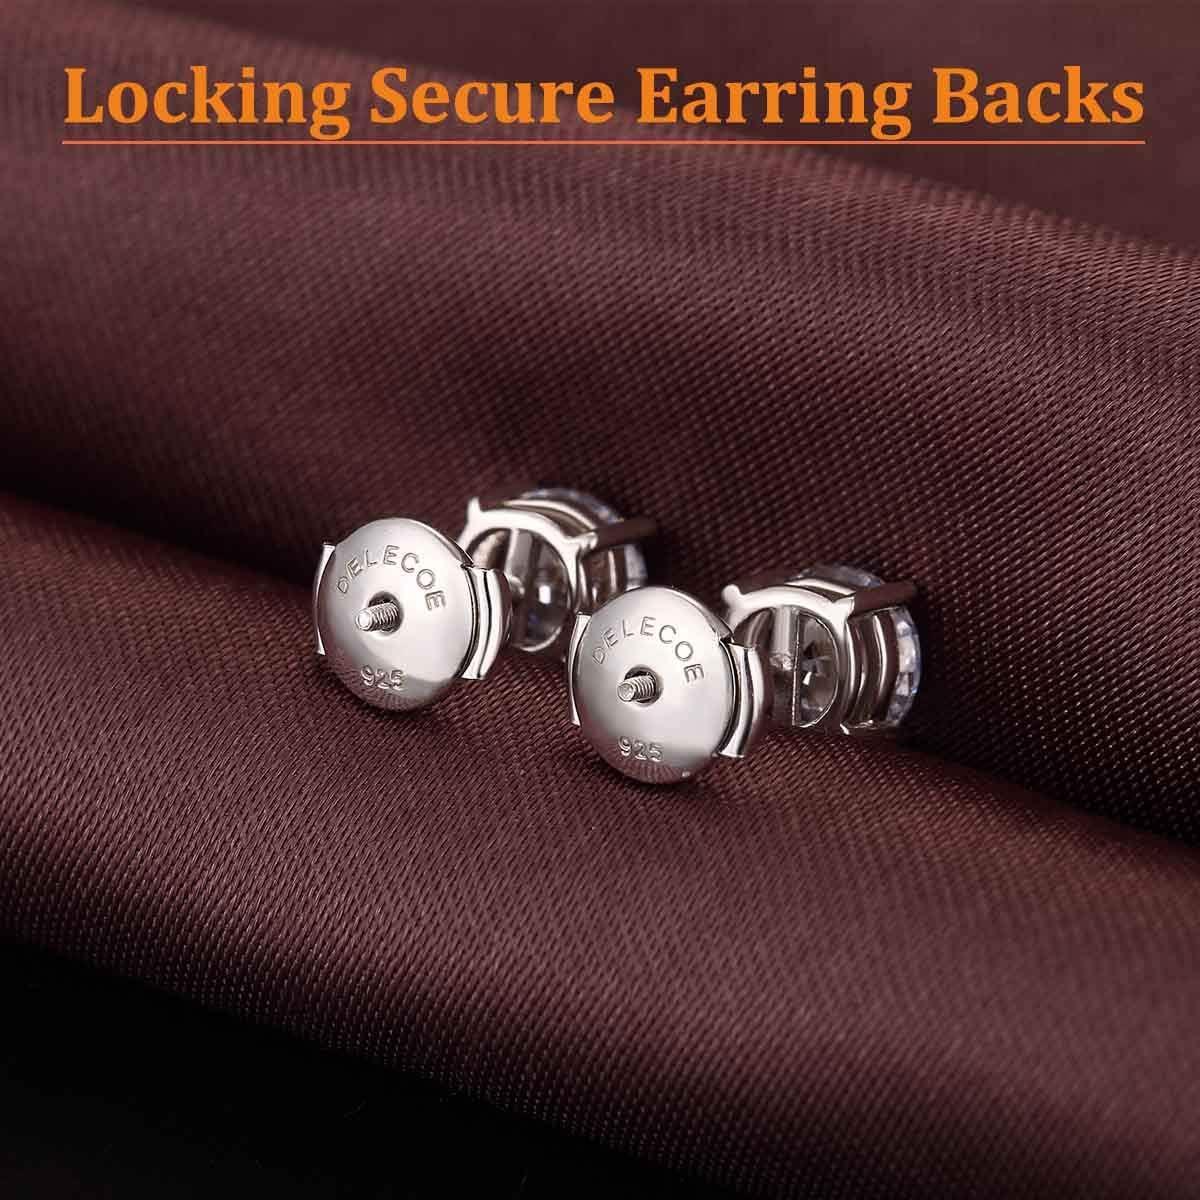  DELECOE 925 Silver Earring Backs Replacements for  Studs,Hypoallergenic Secure Gold Earring Backs Locking for Studs Earrings,  12pcs : Arts, Crafts & Sewing